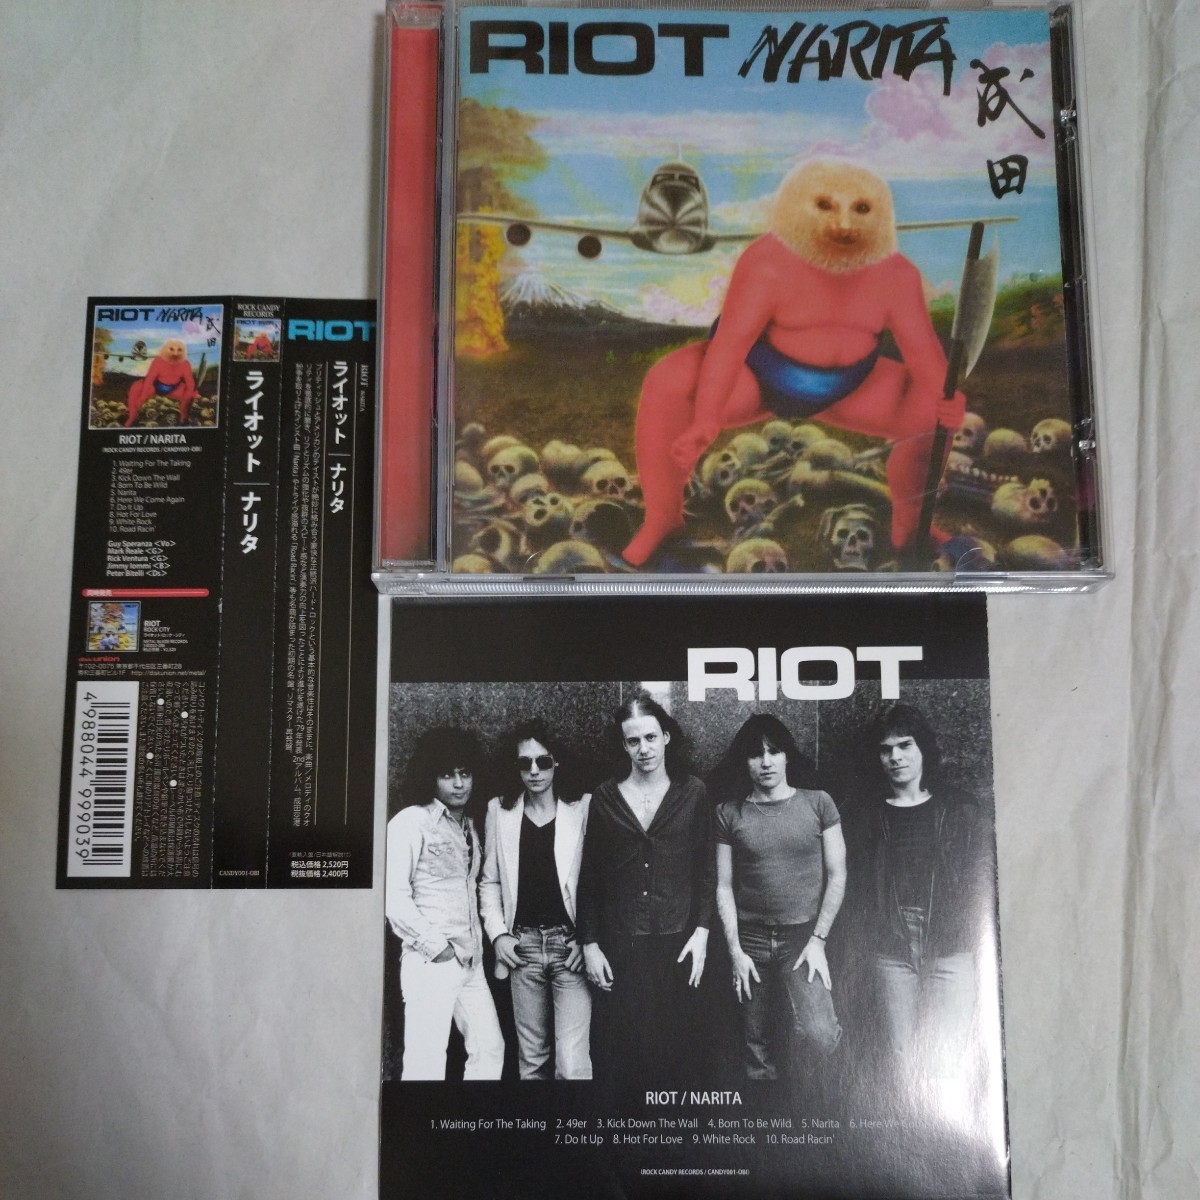  hard-to-find *DU record * with belt *la Io to*nalita*RIOT*NARITA*CANDY001* foreign record domestic specification # disk Union 